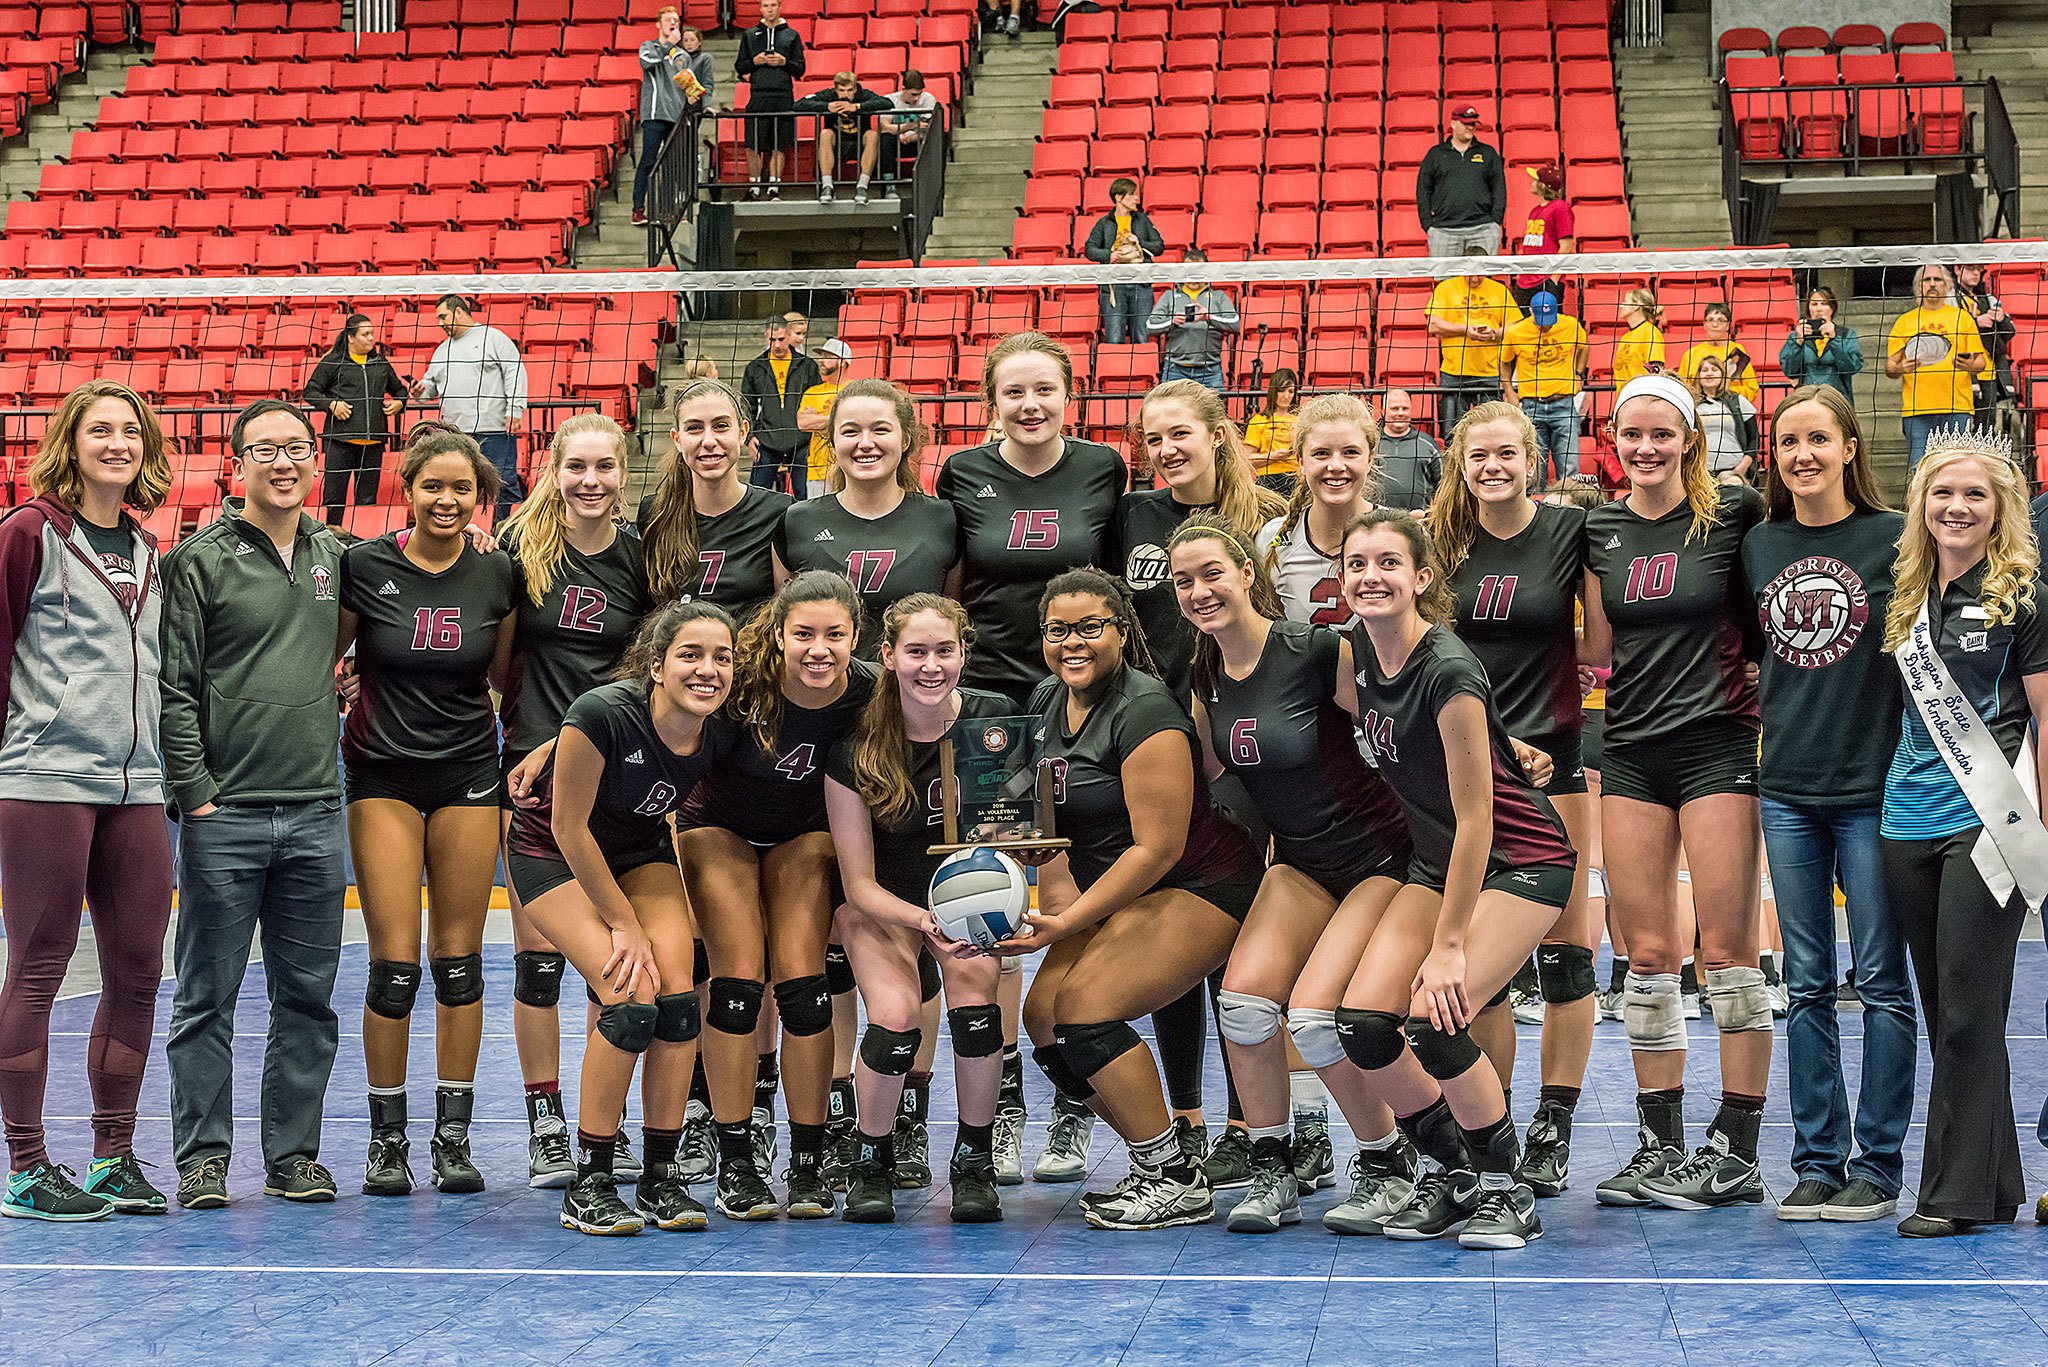 The Mercer Island volleyball team brought home a third-place trophy from the 2016 3A state volleyball championships Saturday at the Toyota Center in Kennewick. Photo courtesy of John Fisk.